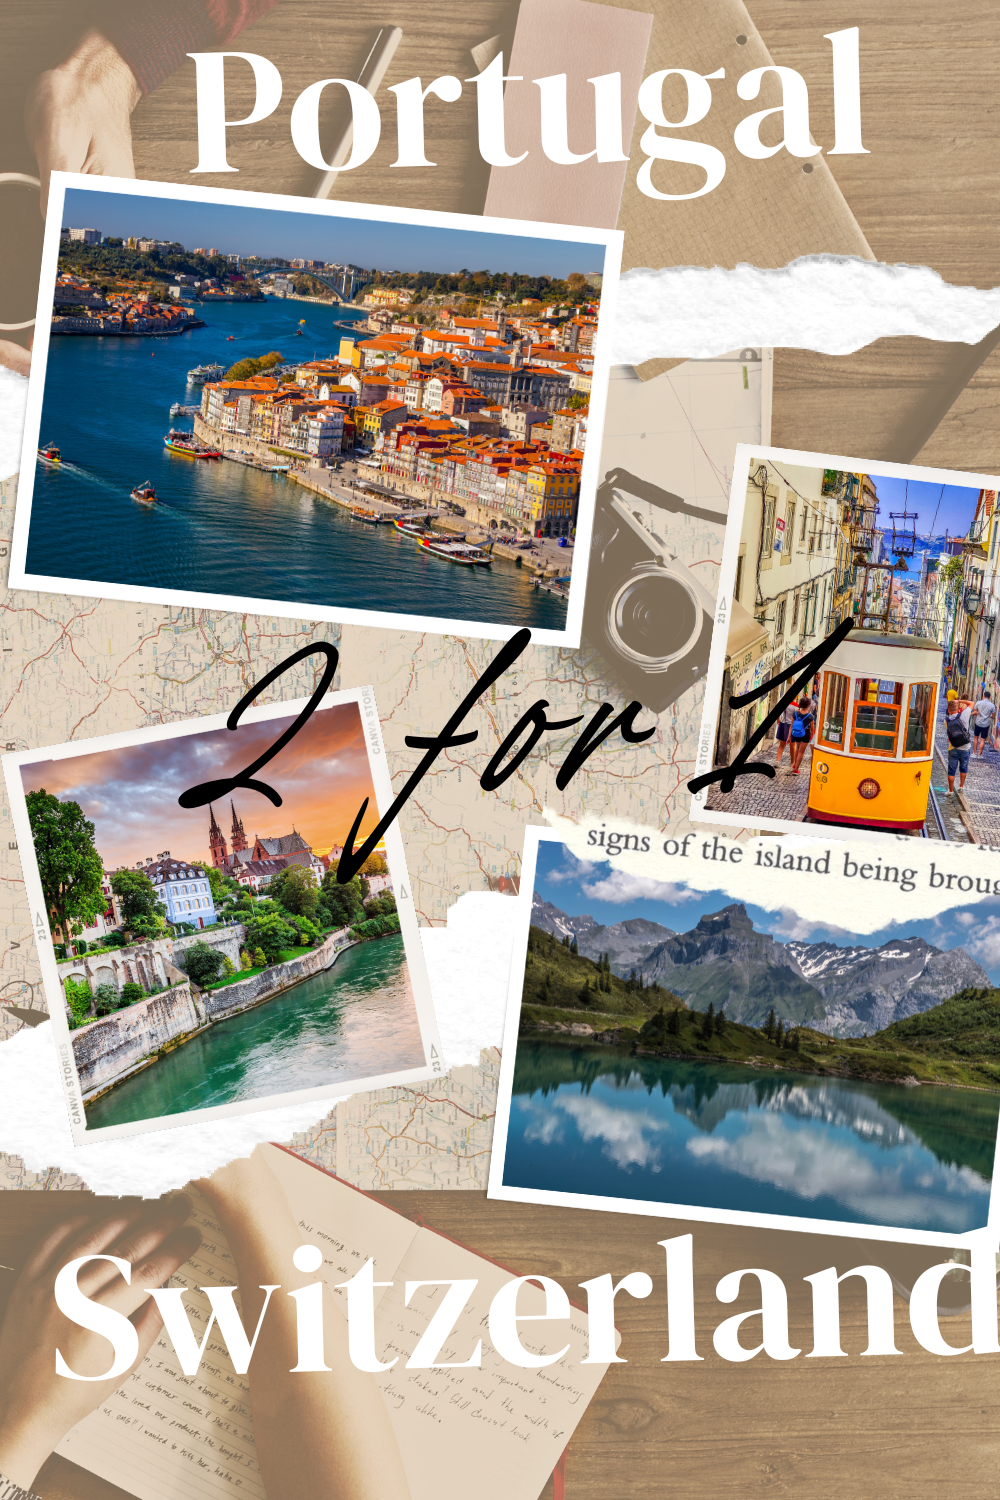 Fly To Portugal & Switzerland Both For $531 With Air Portugal